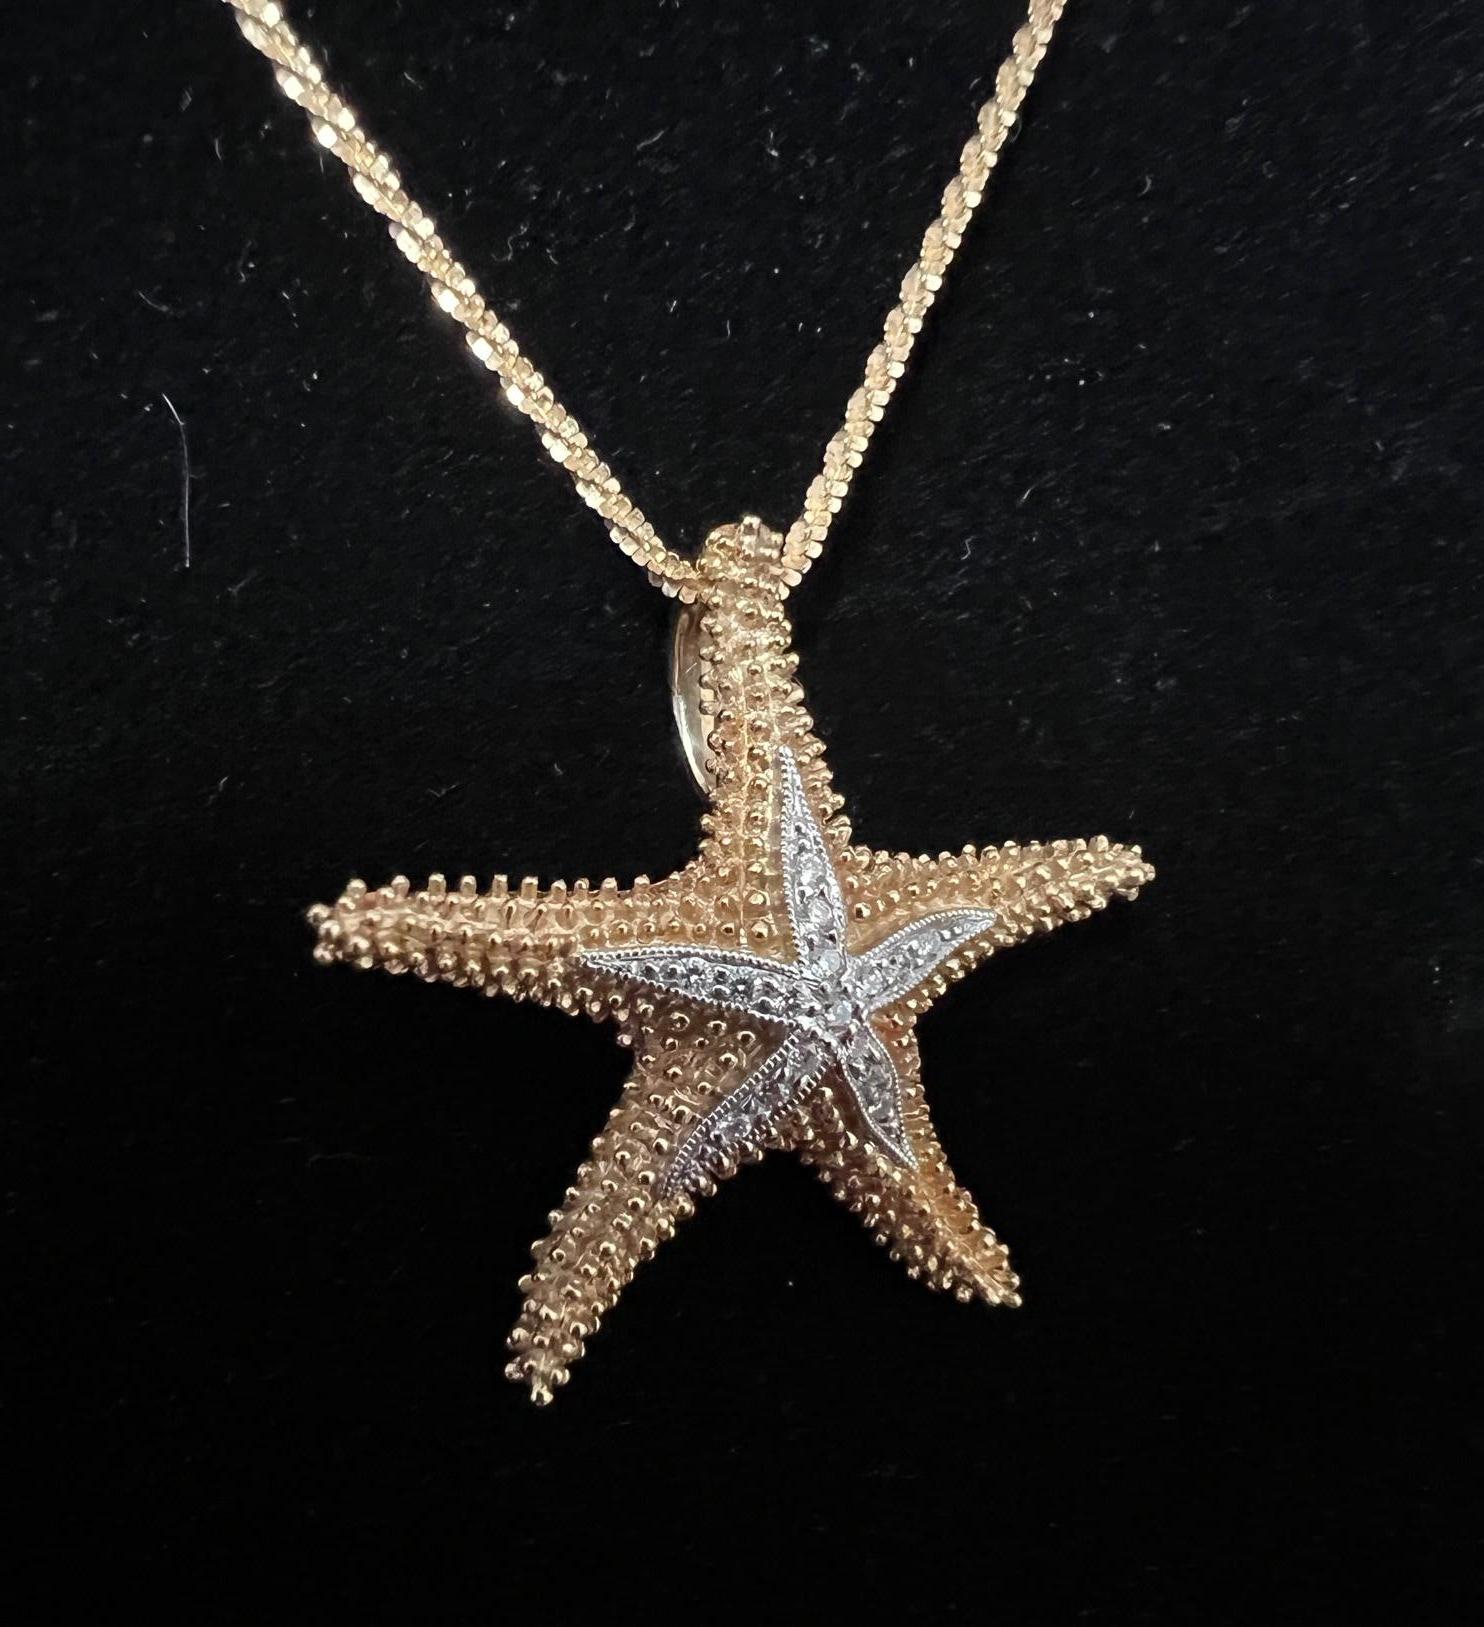 This is a 14k 30mm starfish pendant with sixteen diamonds finely handcrafted by Denny Wong. 

Gold: 14k yellow gold

Jewels: 16 diamonds totaling in 0.08 carats

Long adjustable diamond cut style chain

Size: 30mm

Award winning jewelry designer